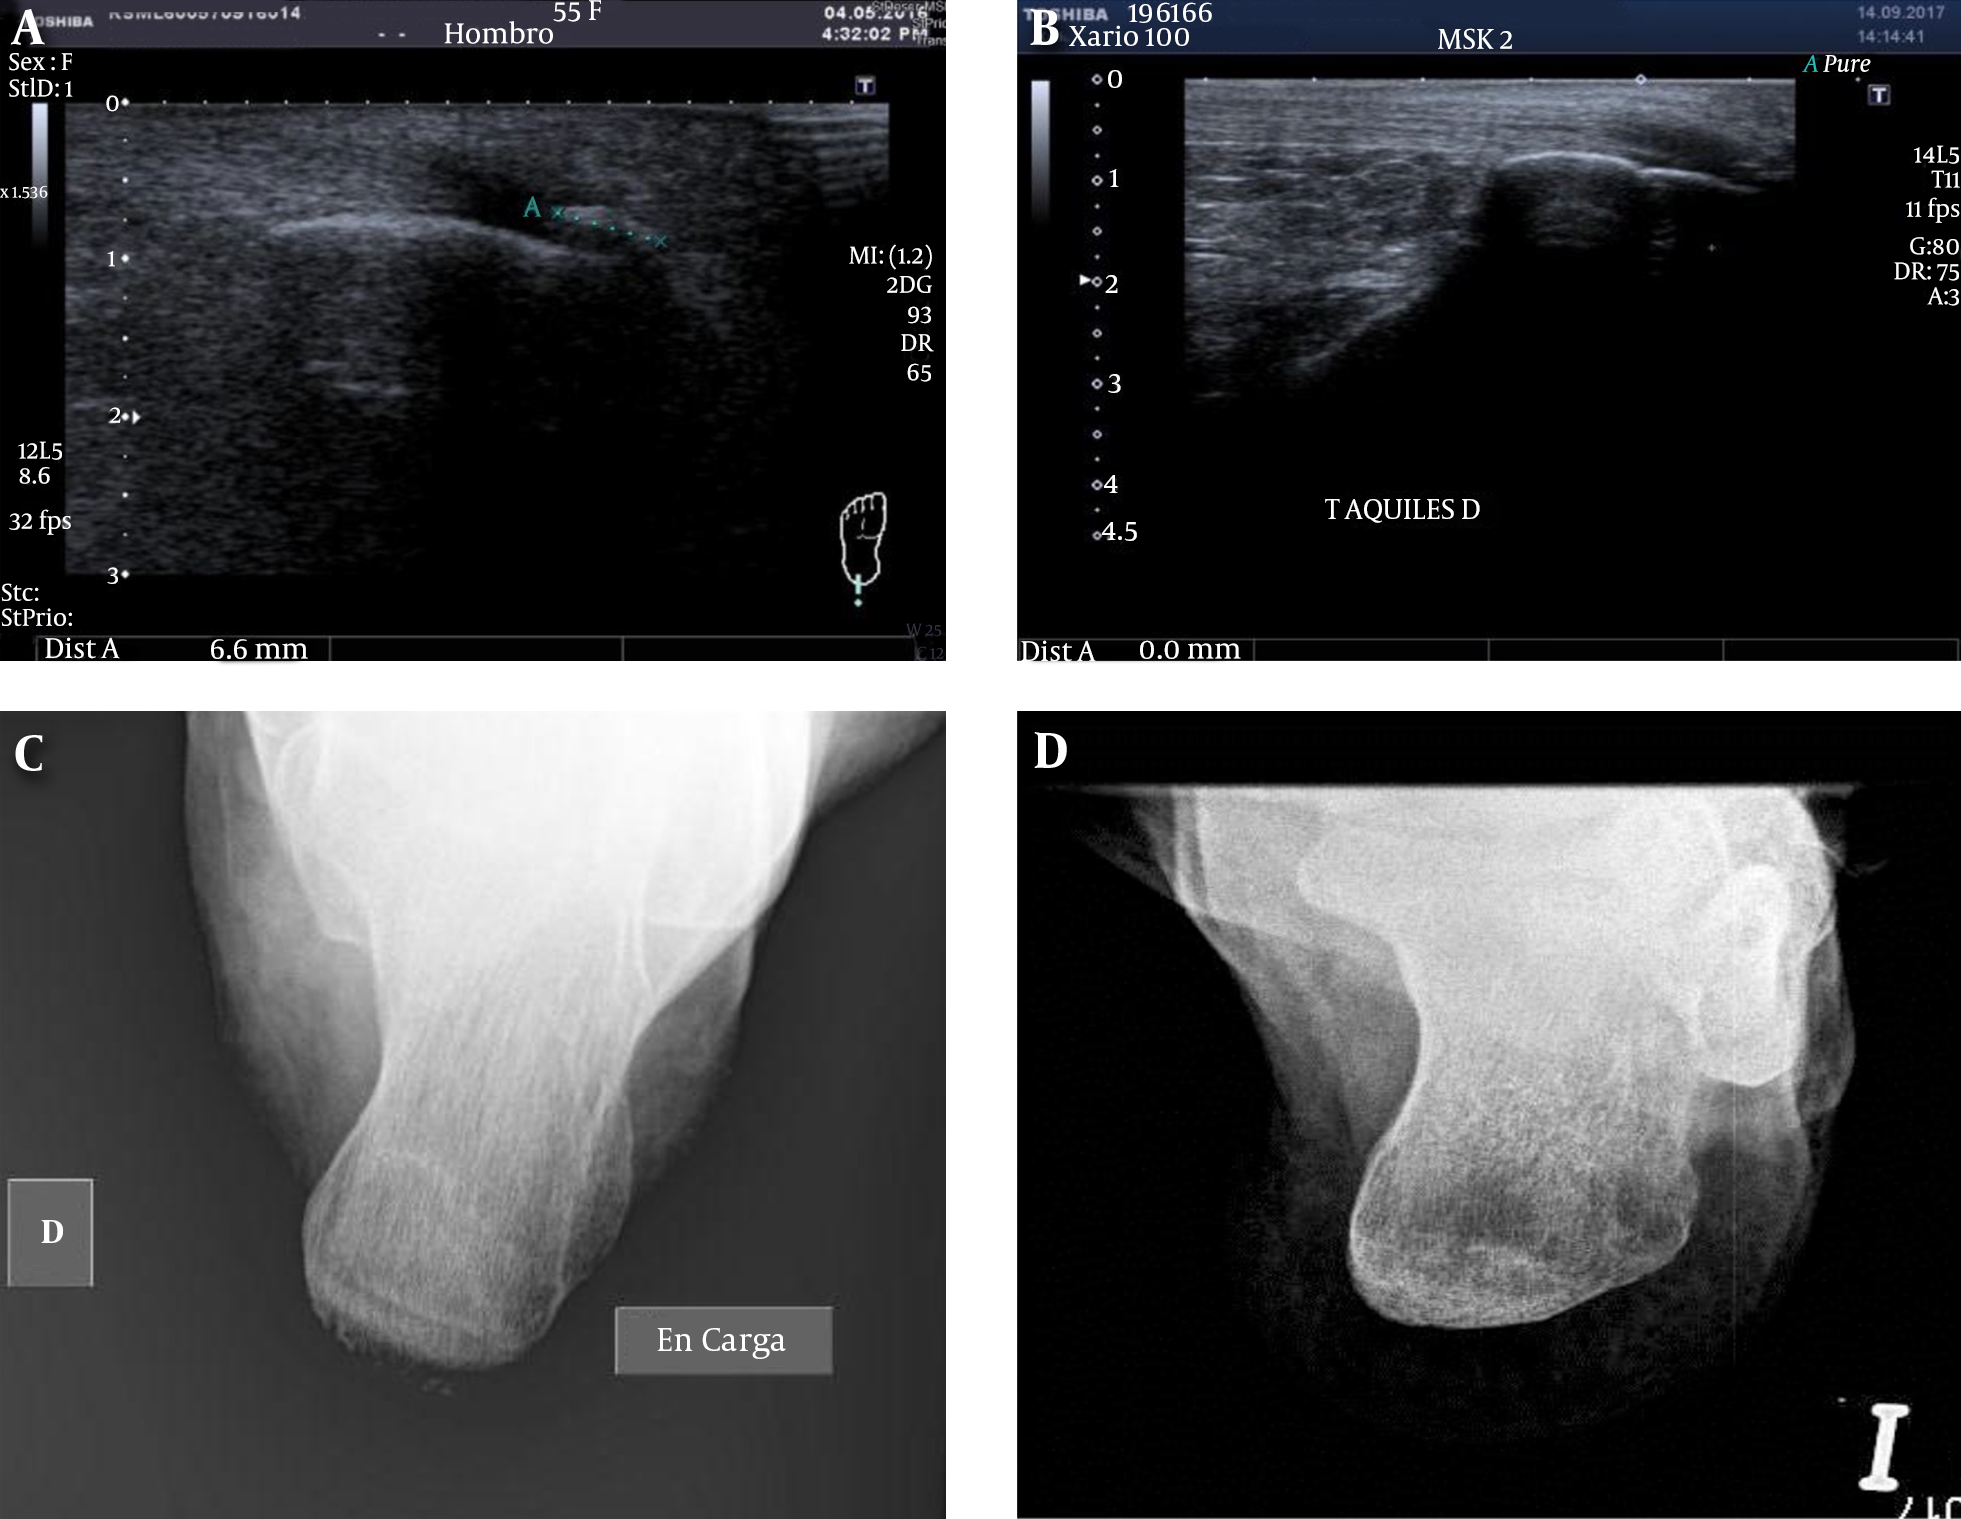 Before treatment: pain measured by VAS 5/10, calcification 6.6 mm evaluated by sonography (A) and radiography (C). After treatment: pain measured by VAS 0/10, calcification 0 mm evaluated by sonography (B) and radiography (D).